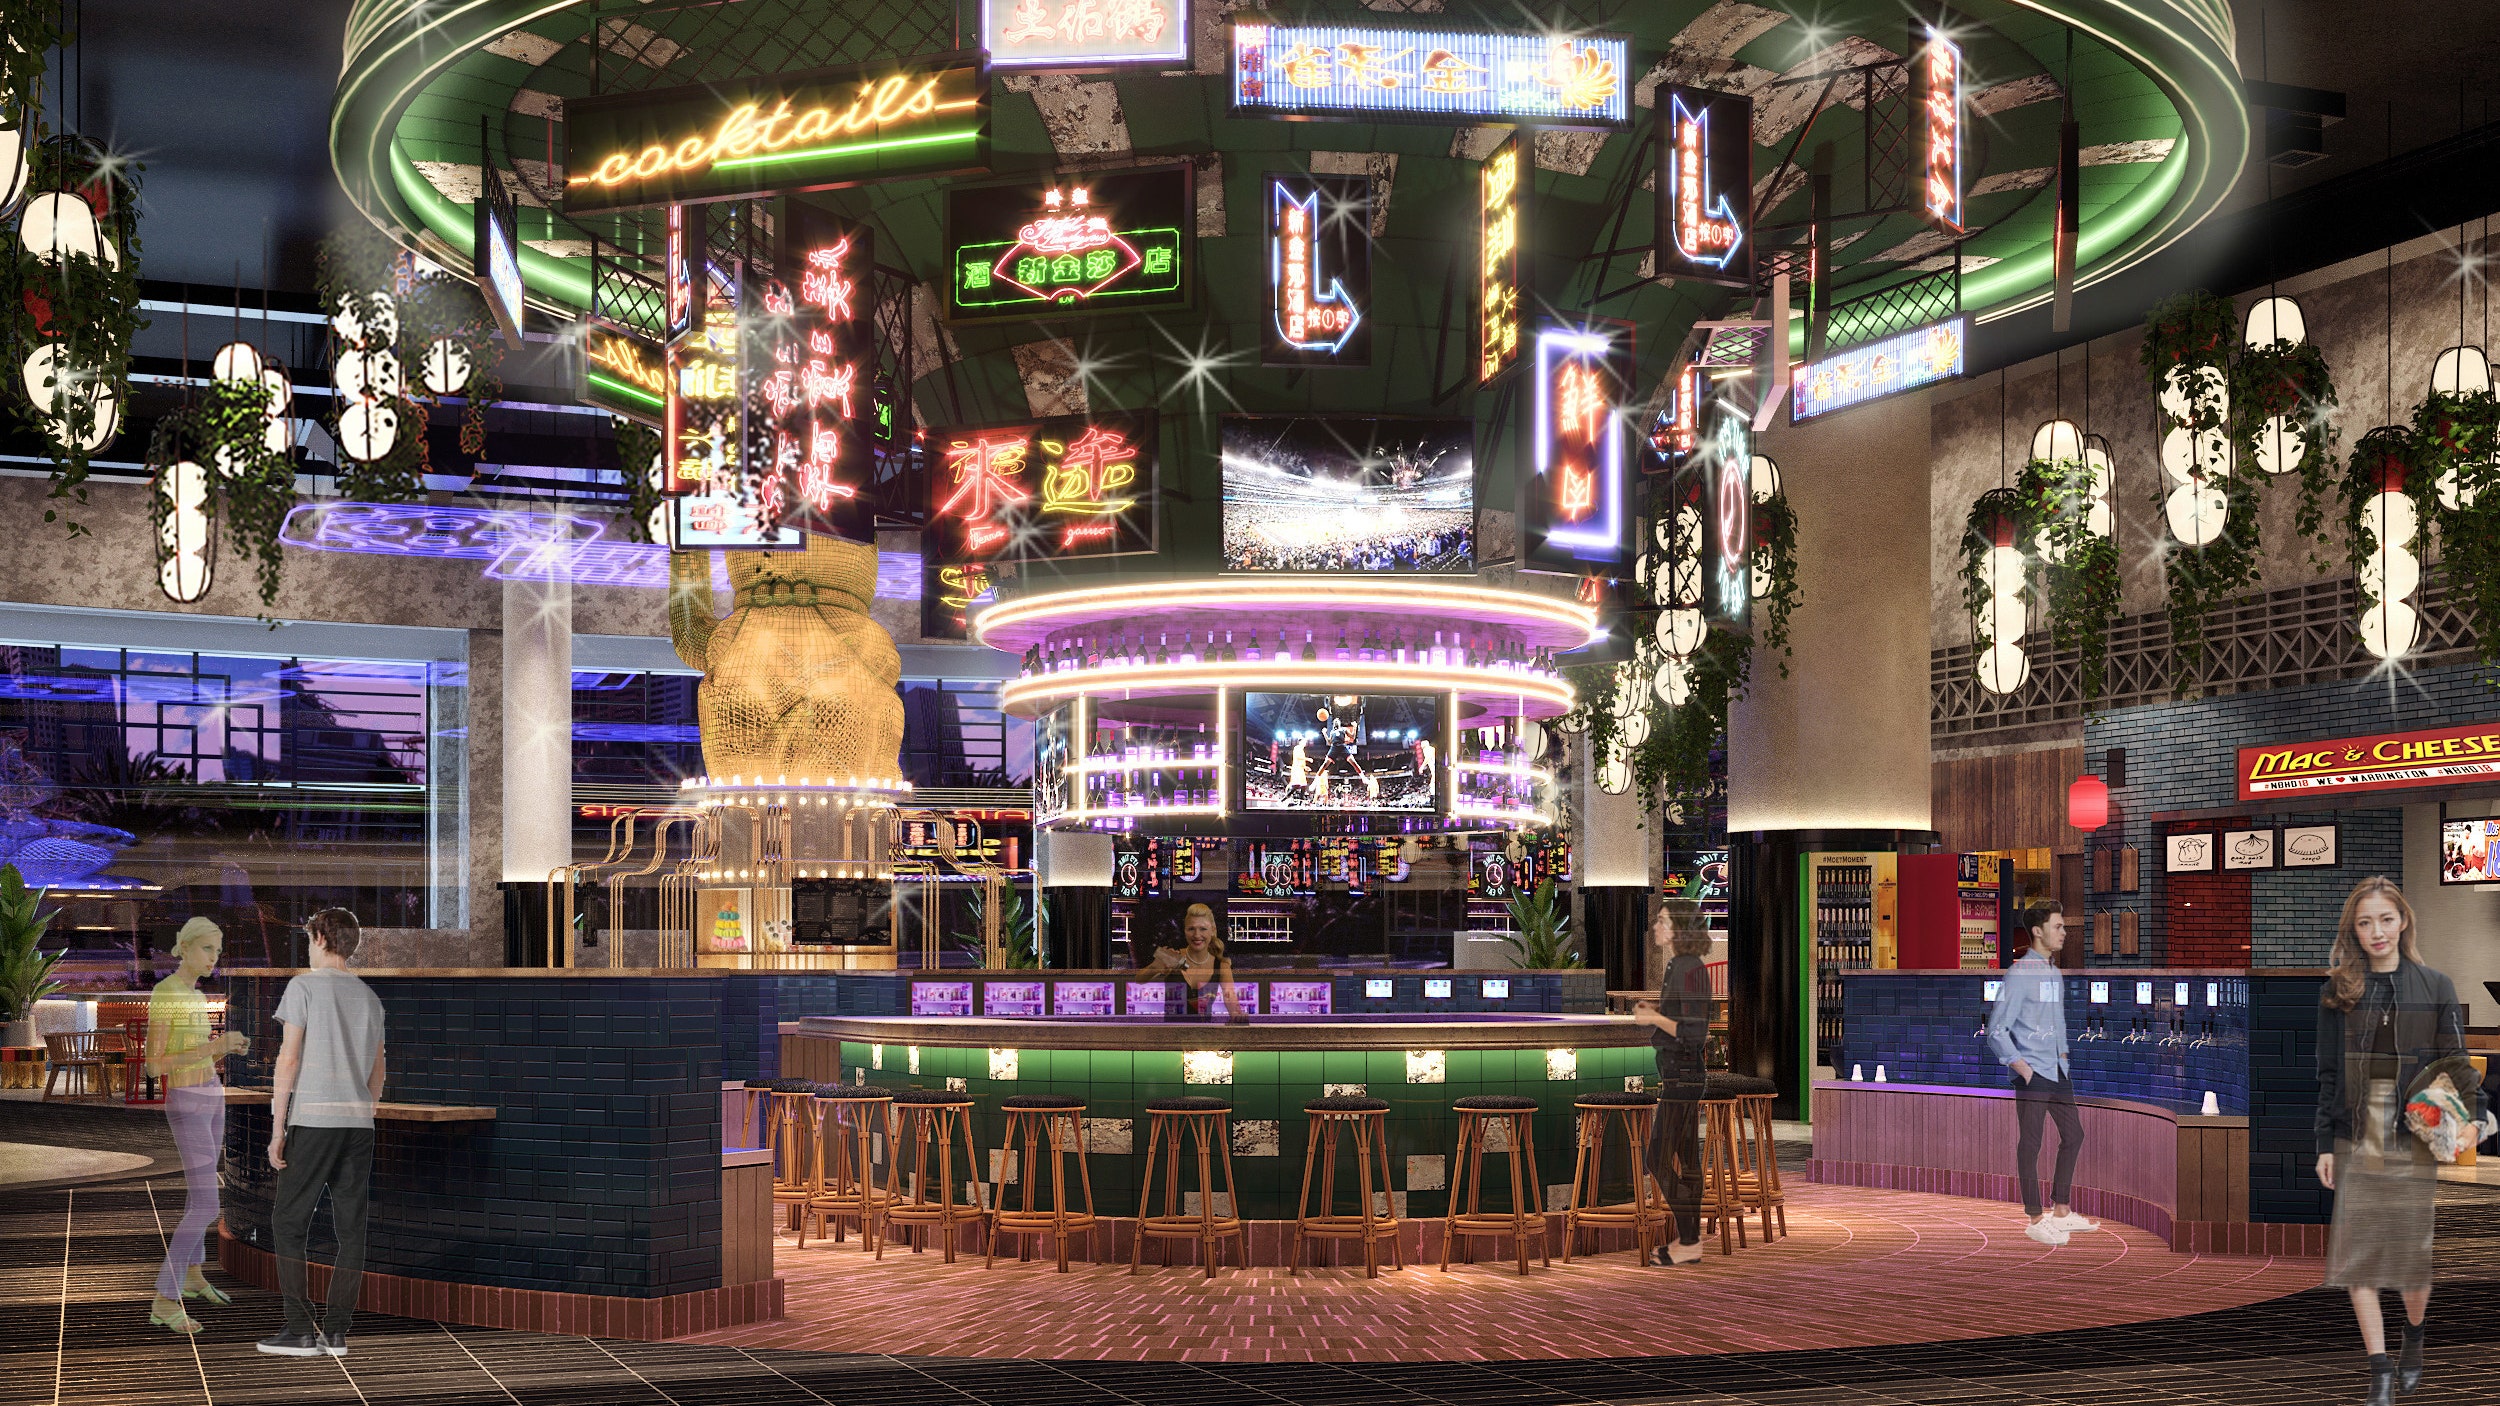 Las Vegas casino to open 'interactive' food hall this summer